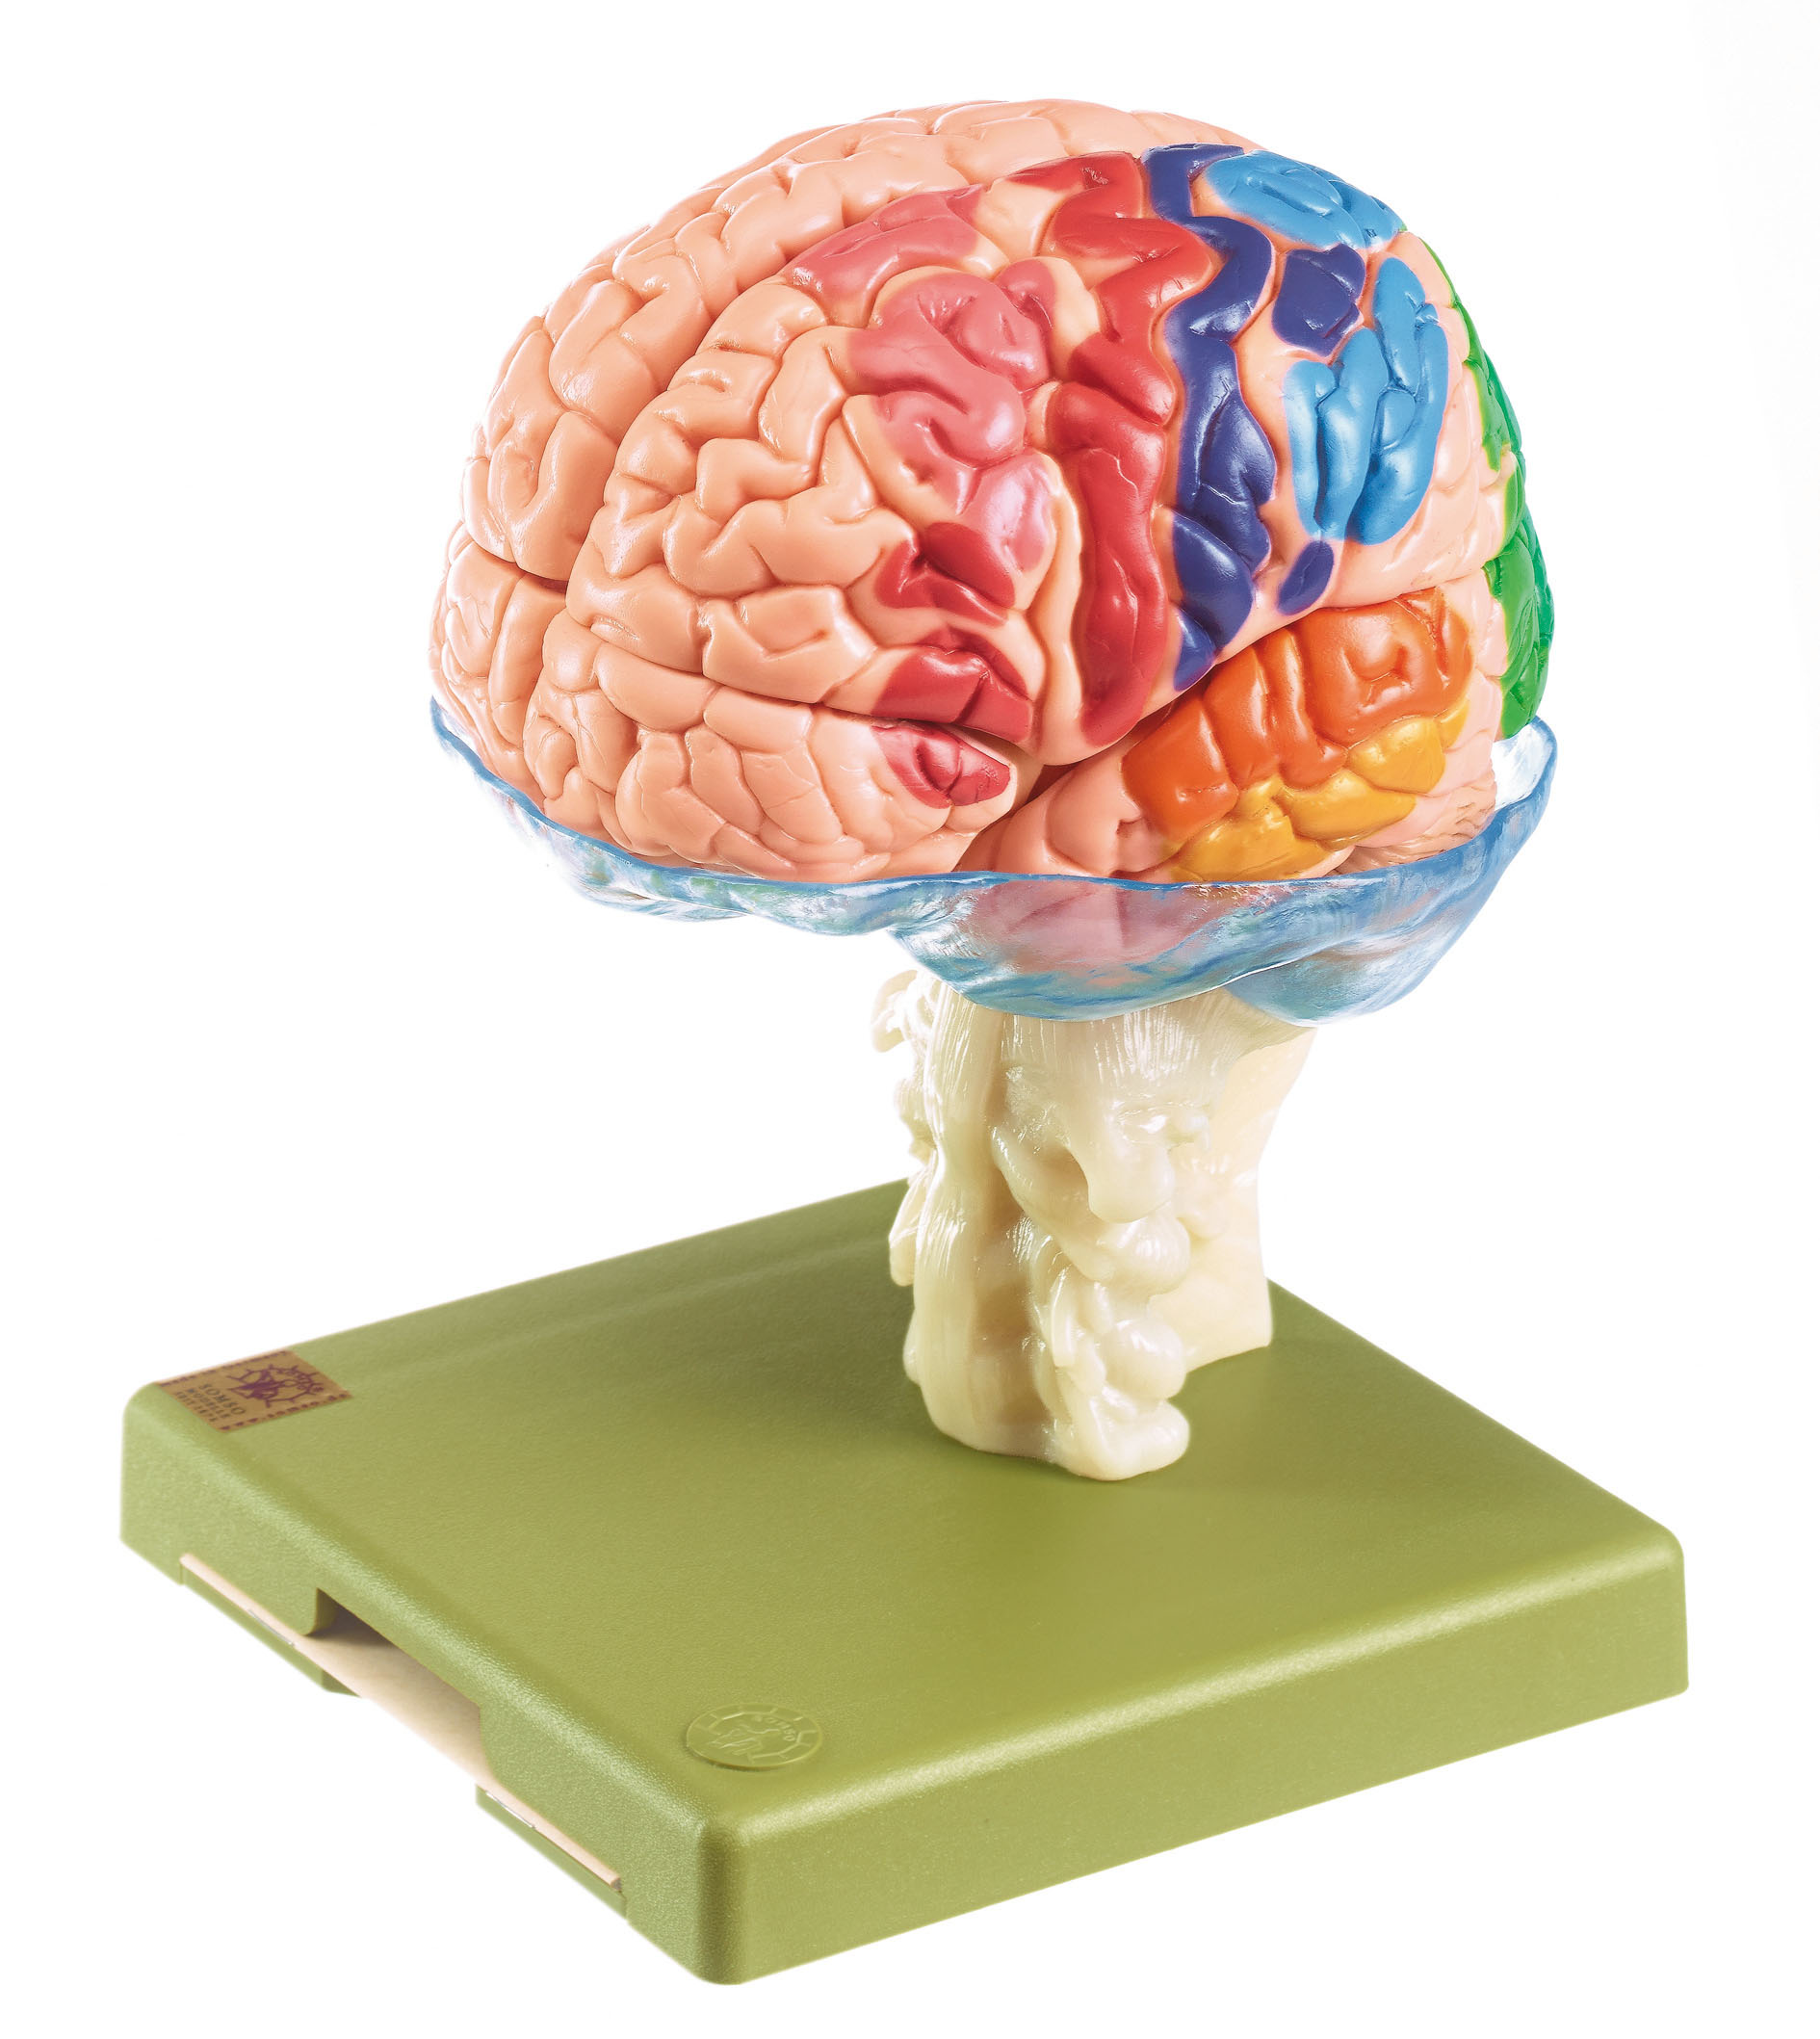 Model of Brain With Indicated Cytoarchtural Areas – Separates Into 15 Parts